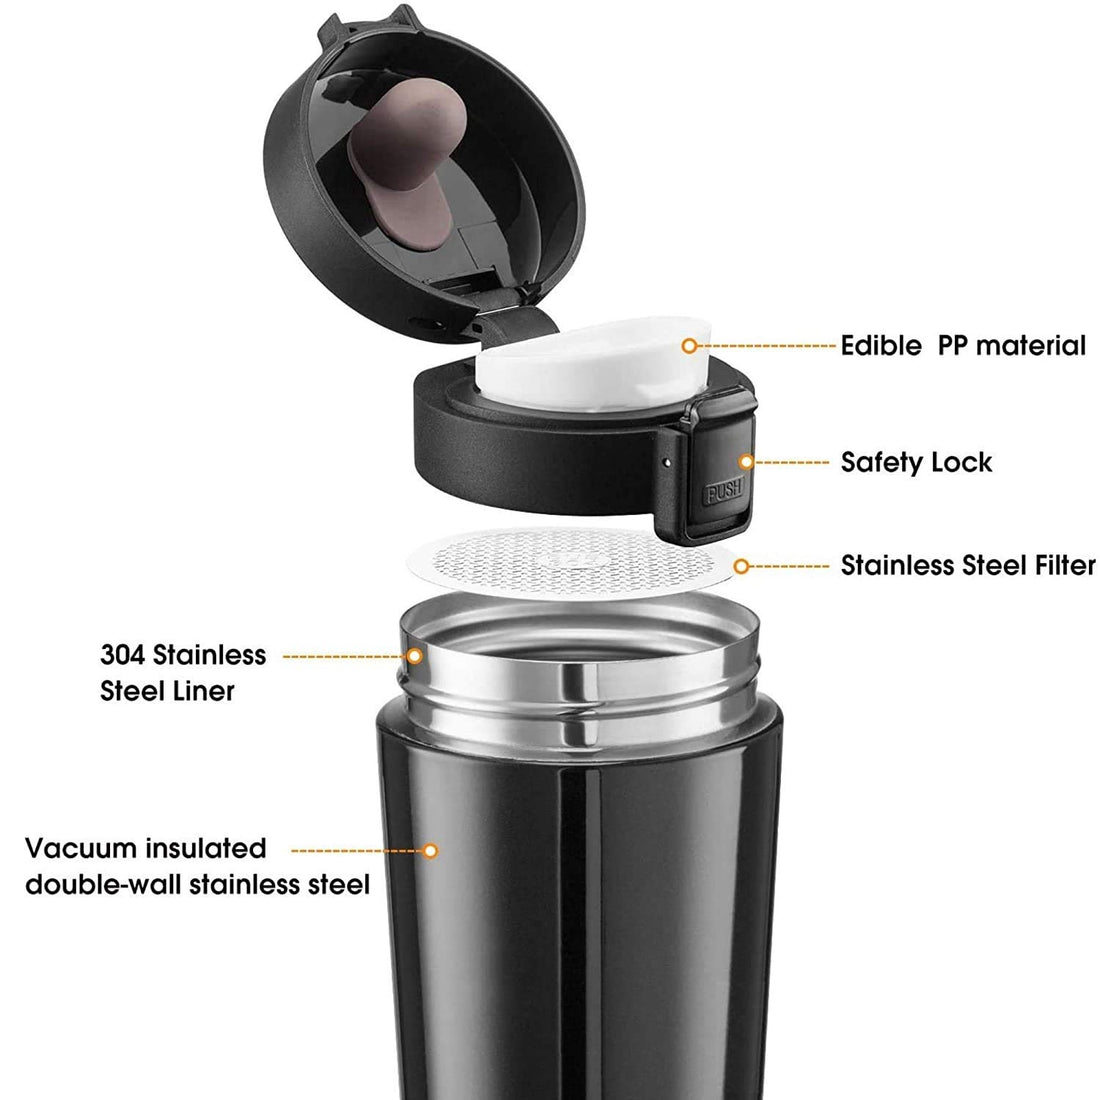 Coffee Thermos Water Bottle Travel Mug Stainless Macao